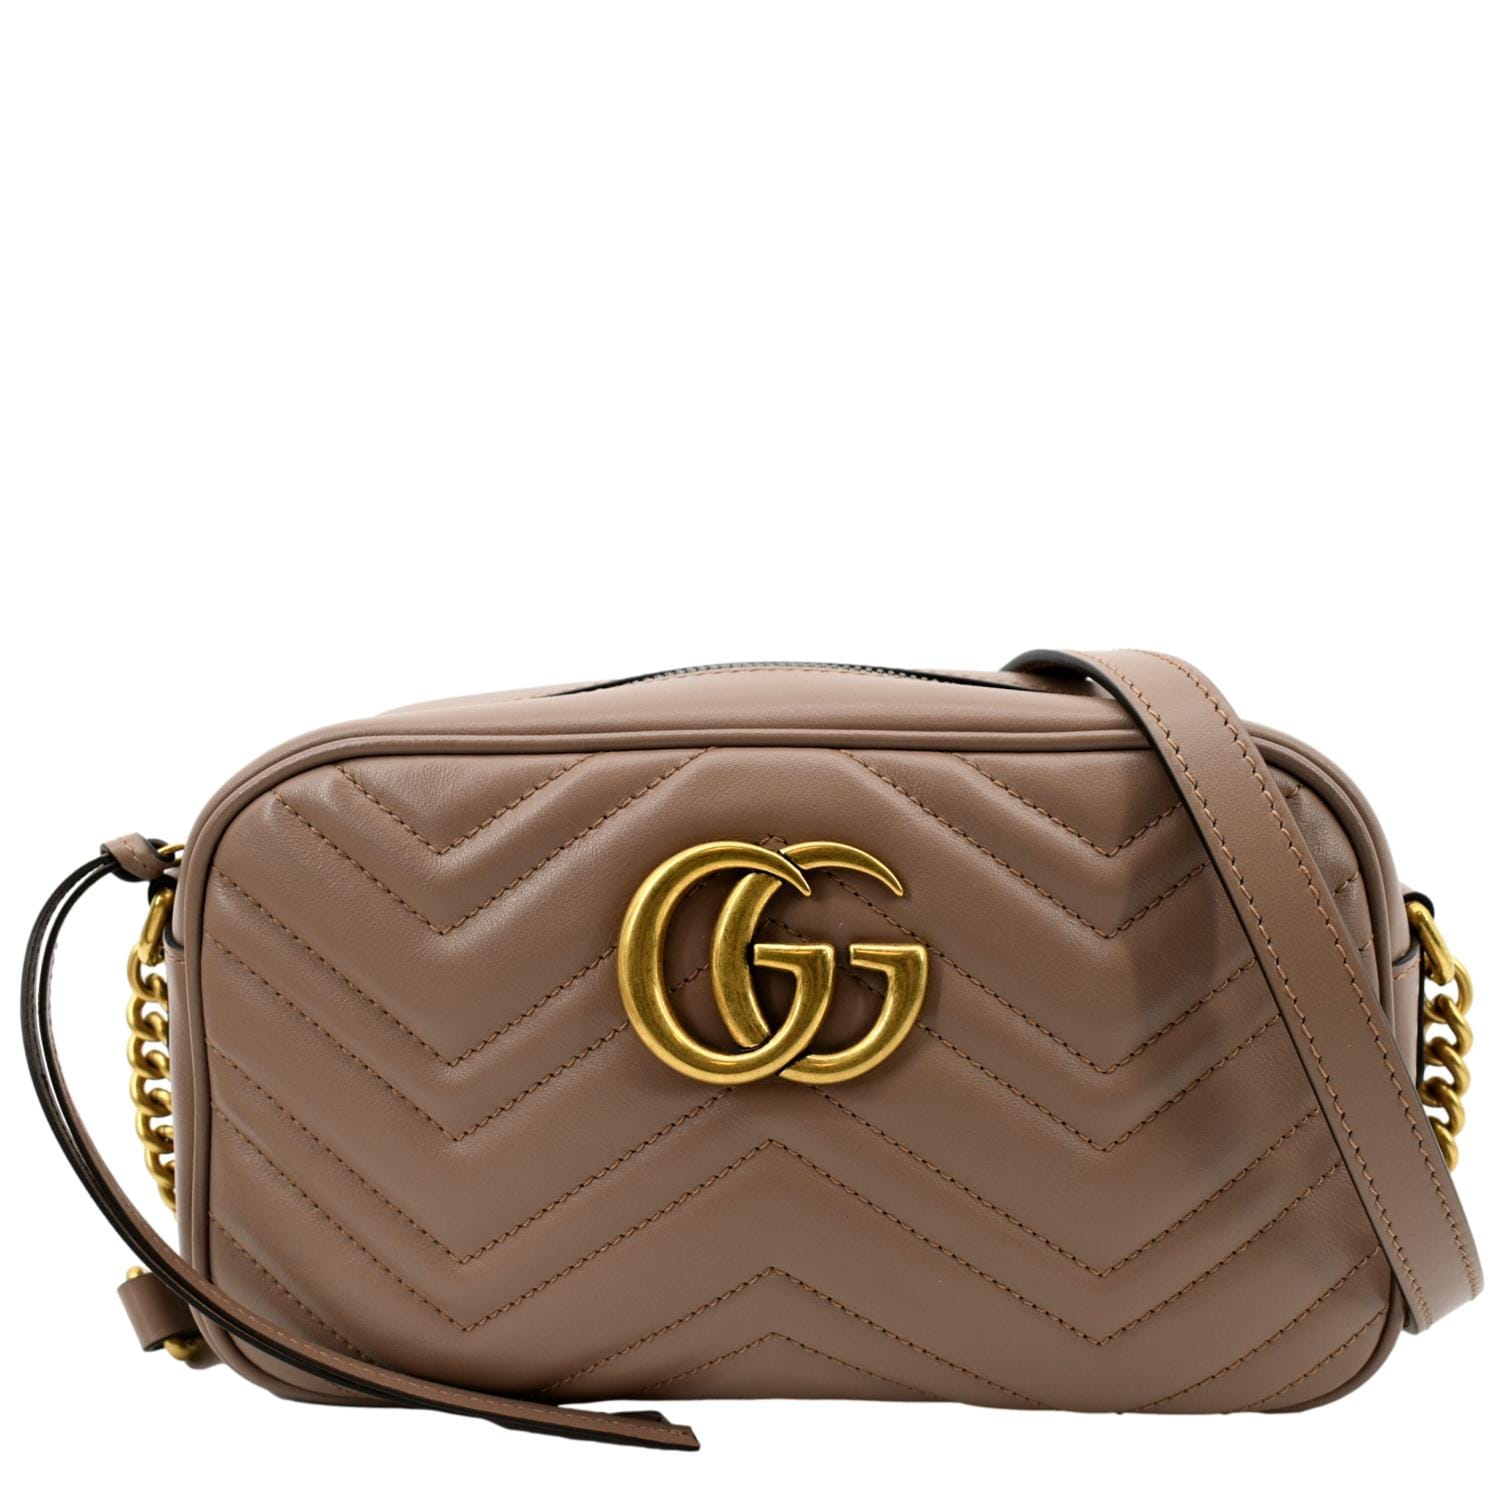 gucci marmont samt - OFF-60% > Shipping free